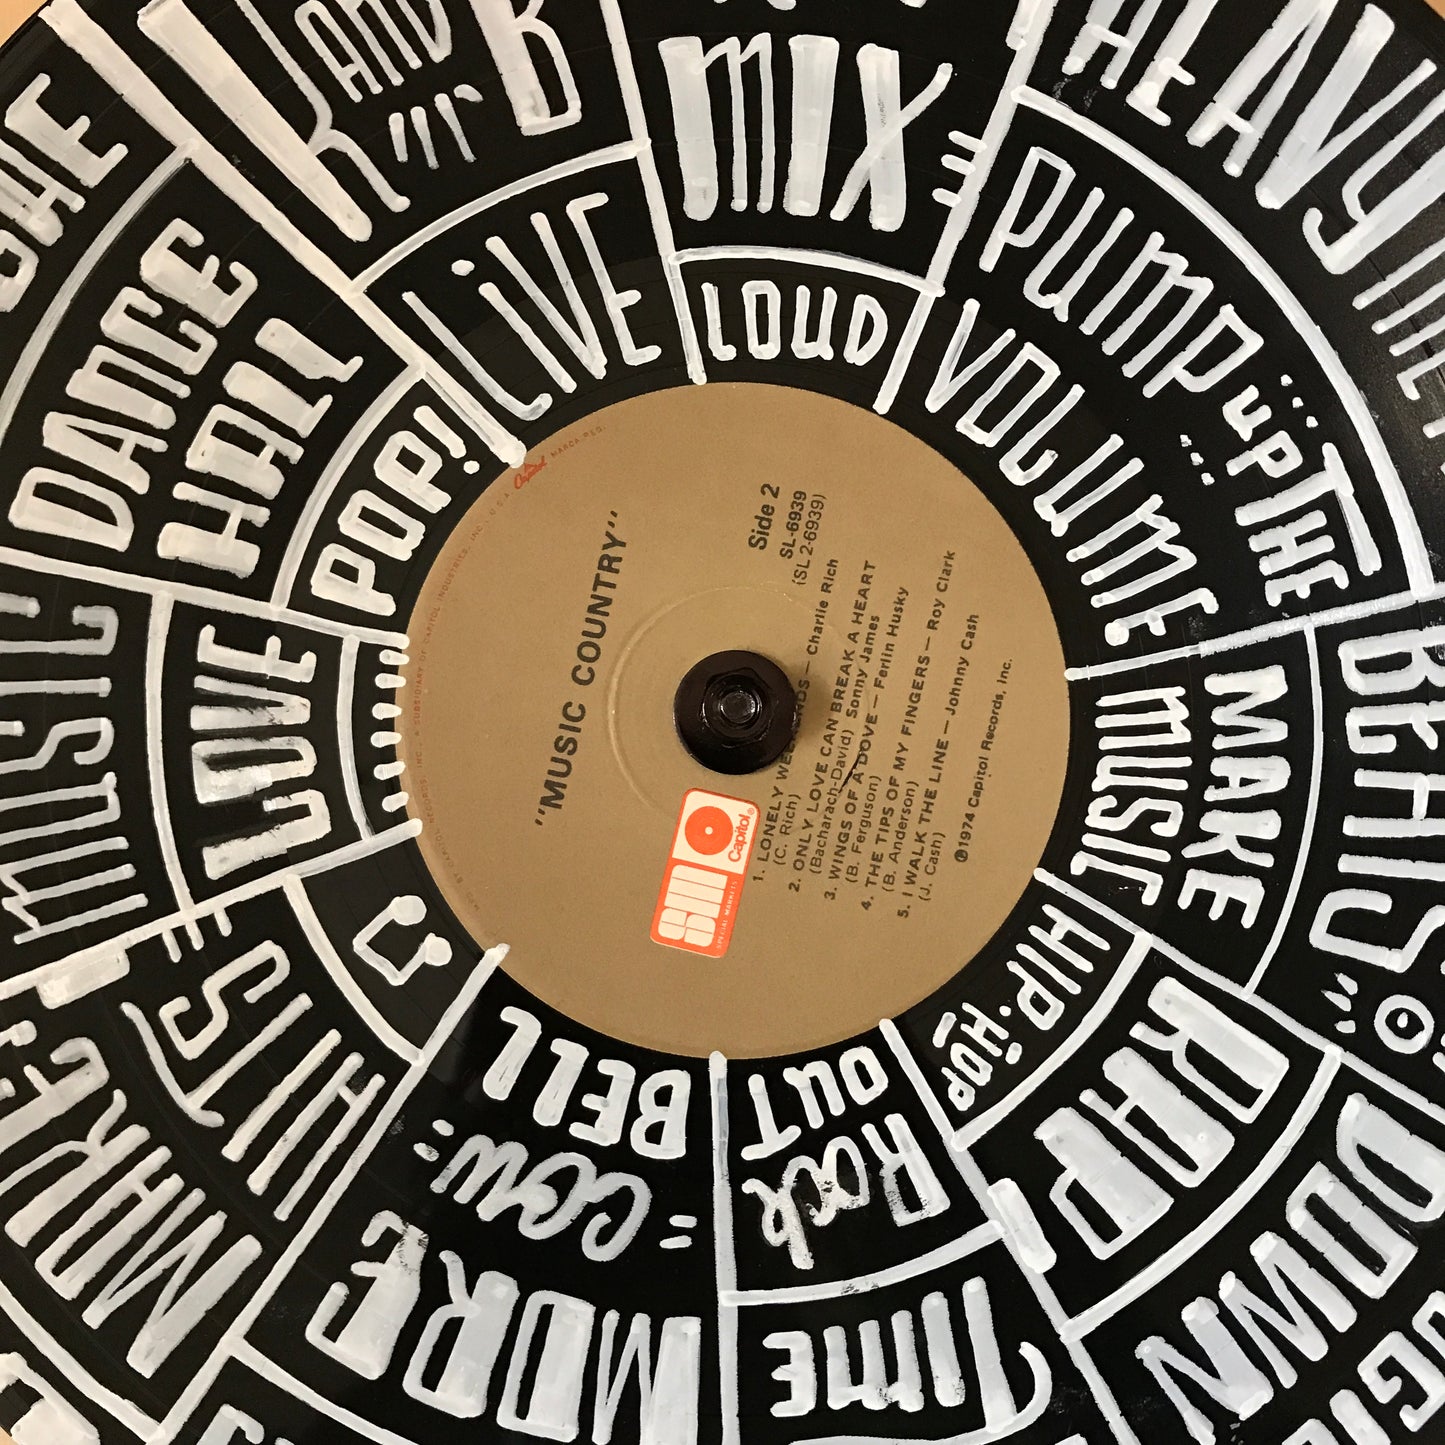 Hand lettered Artwork on Vinyl Record mounted on wood